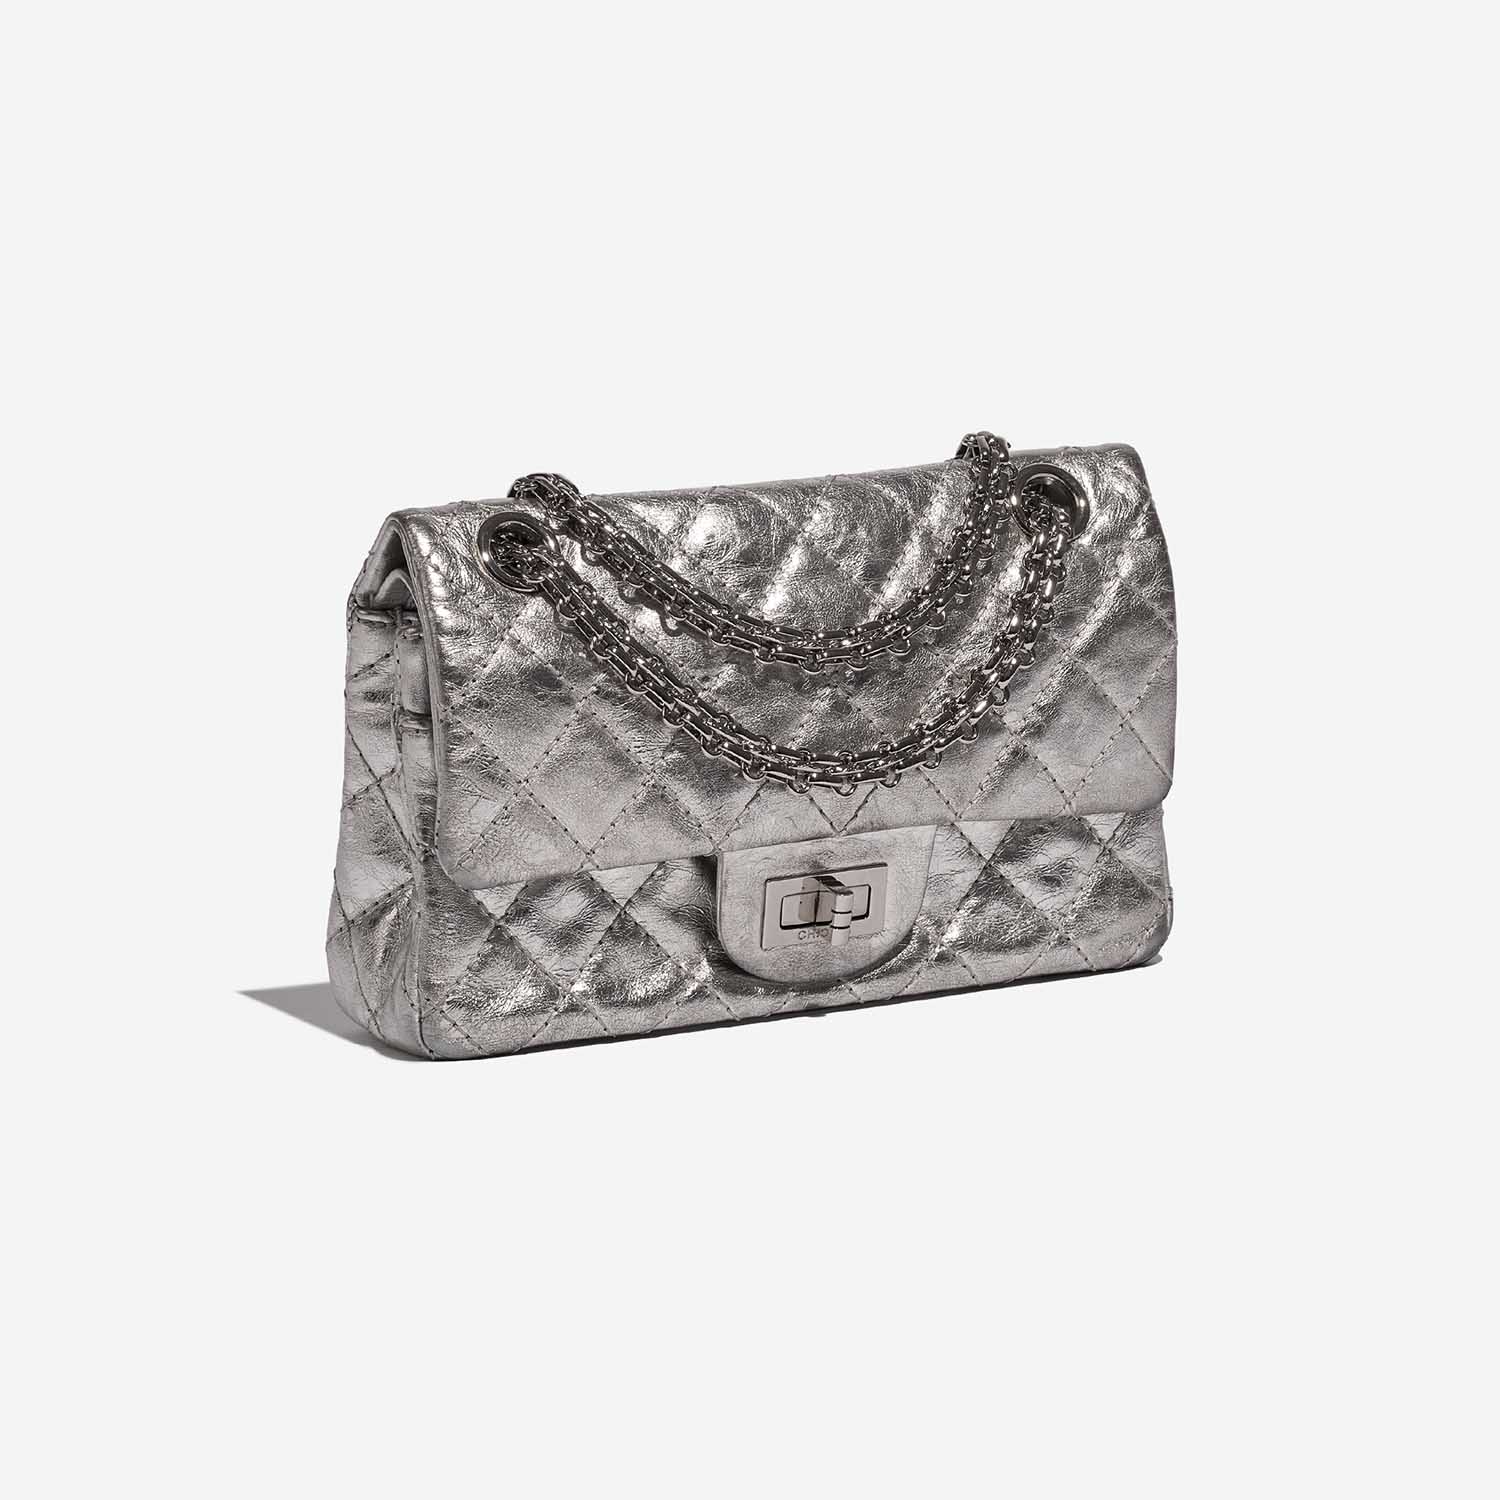 Chanel 2.55 Reissue 224 Aged Calf Silver